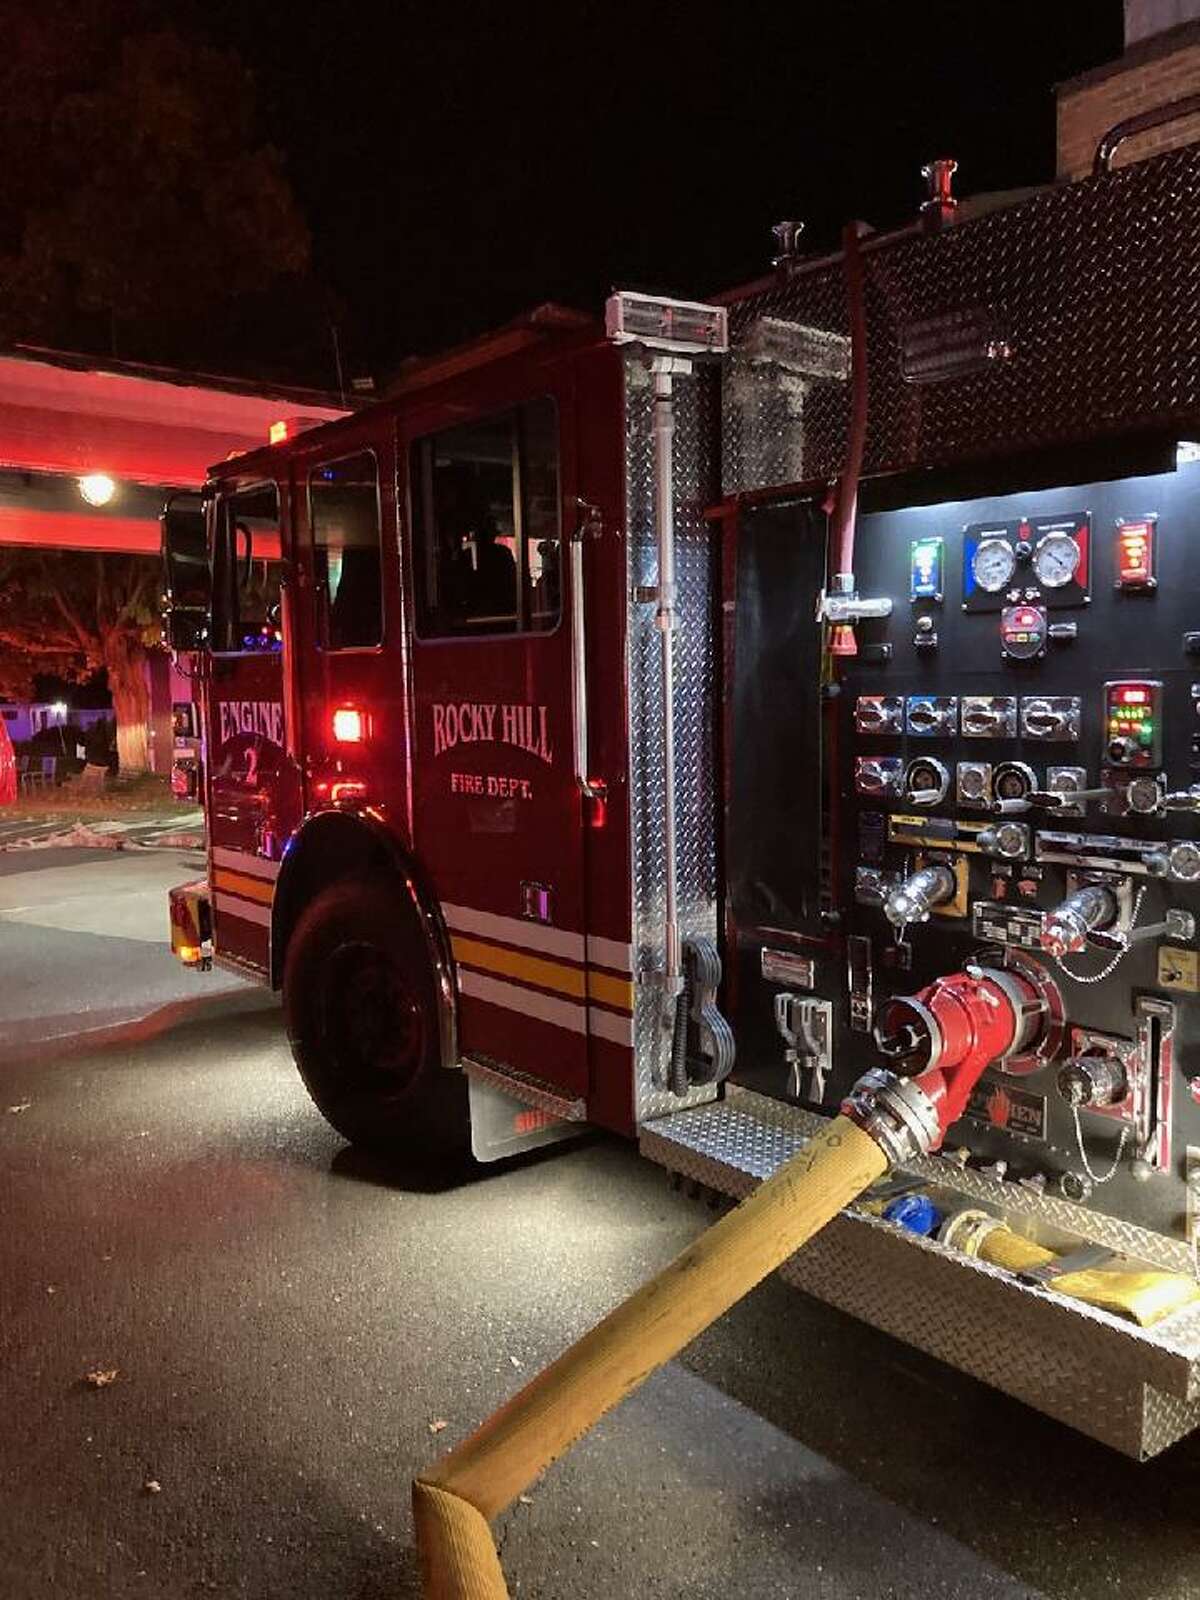 A Cold Spring Road building was evacuated for several hours Tuesday after elevated levels of carbon monoxide were detected, Rocky Hill fire officials said.